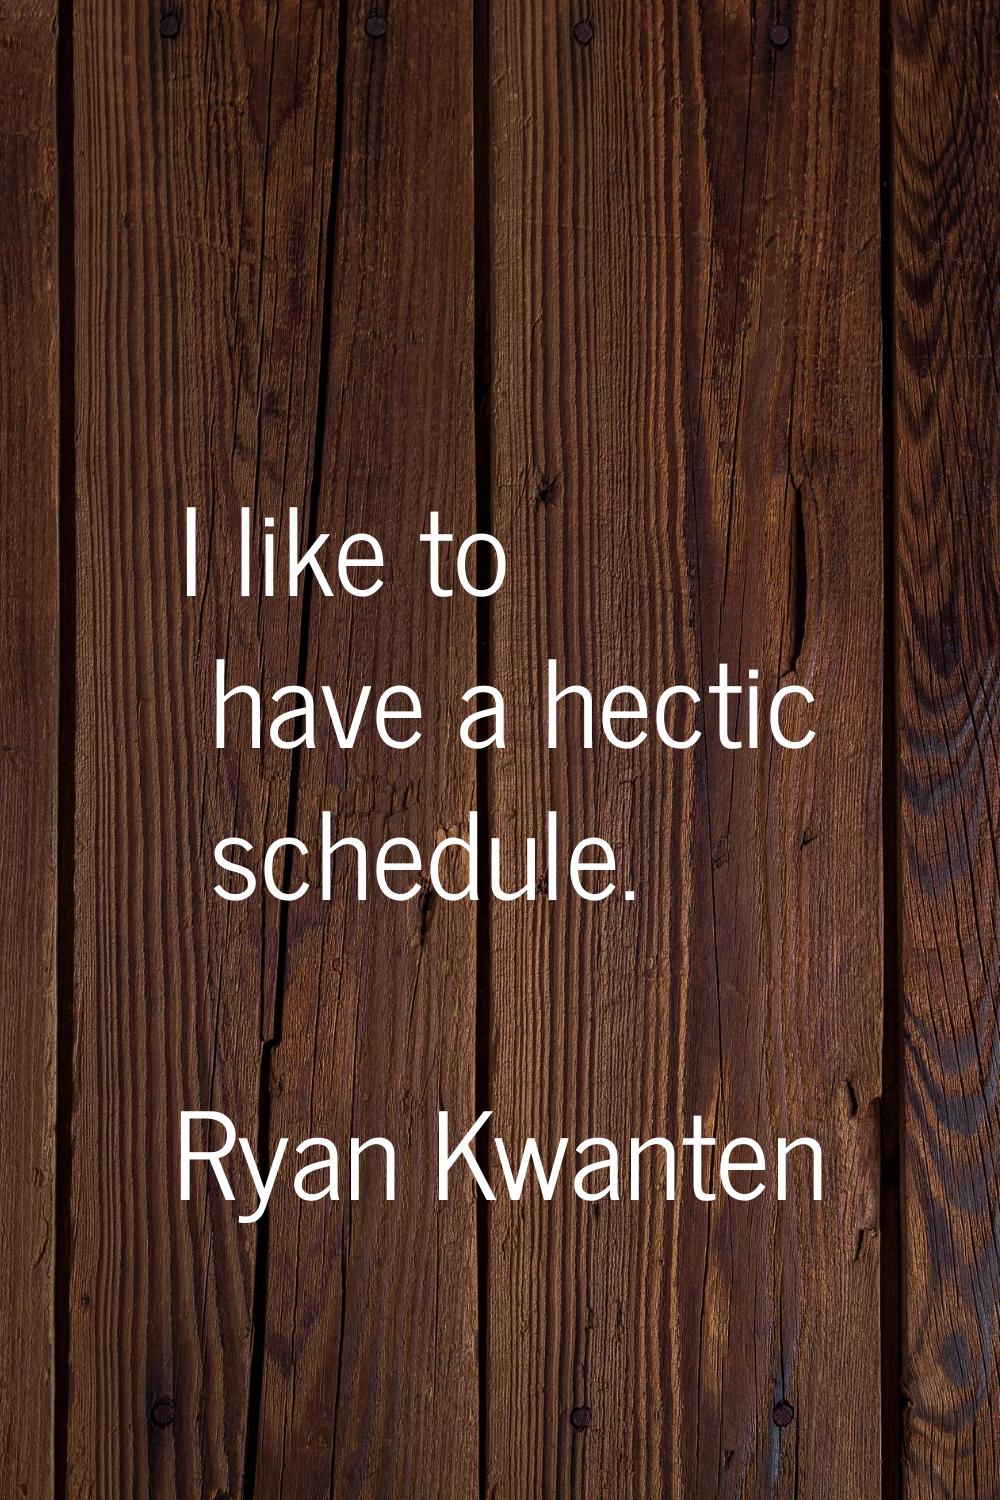 I like to have a hectic schedule.